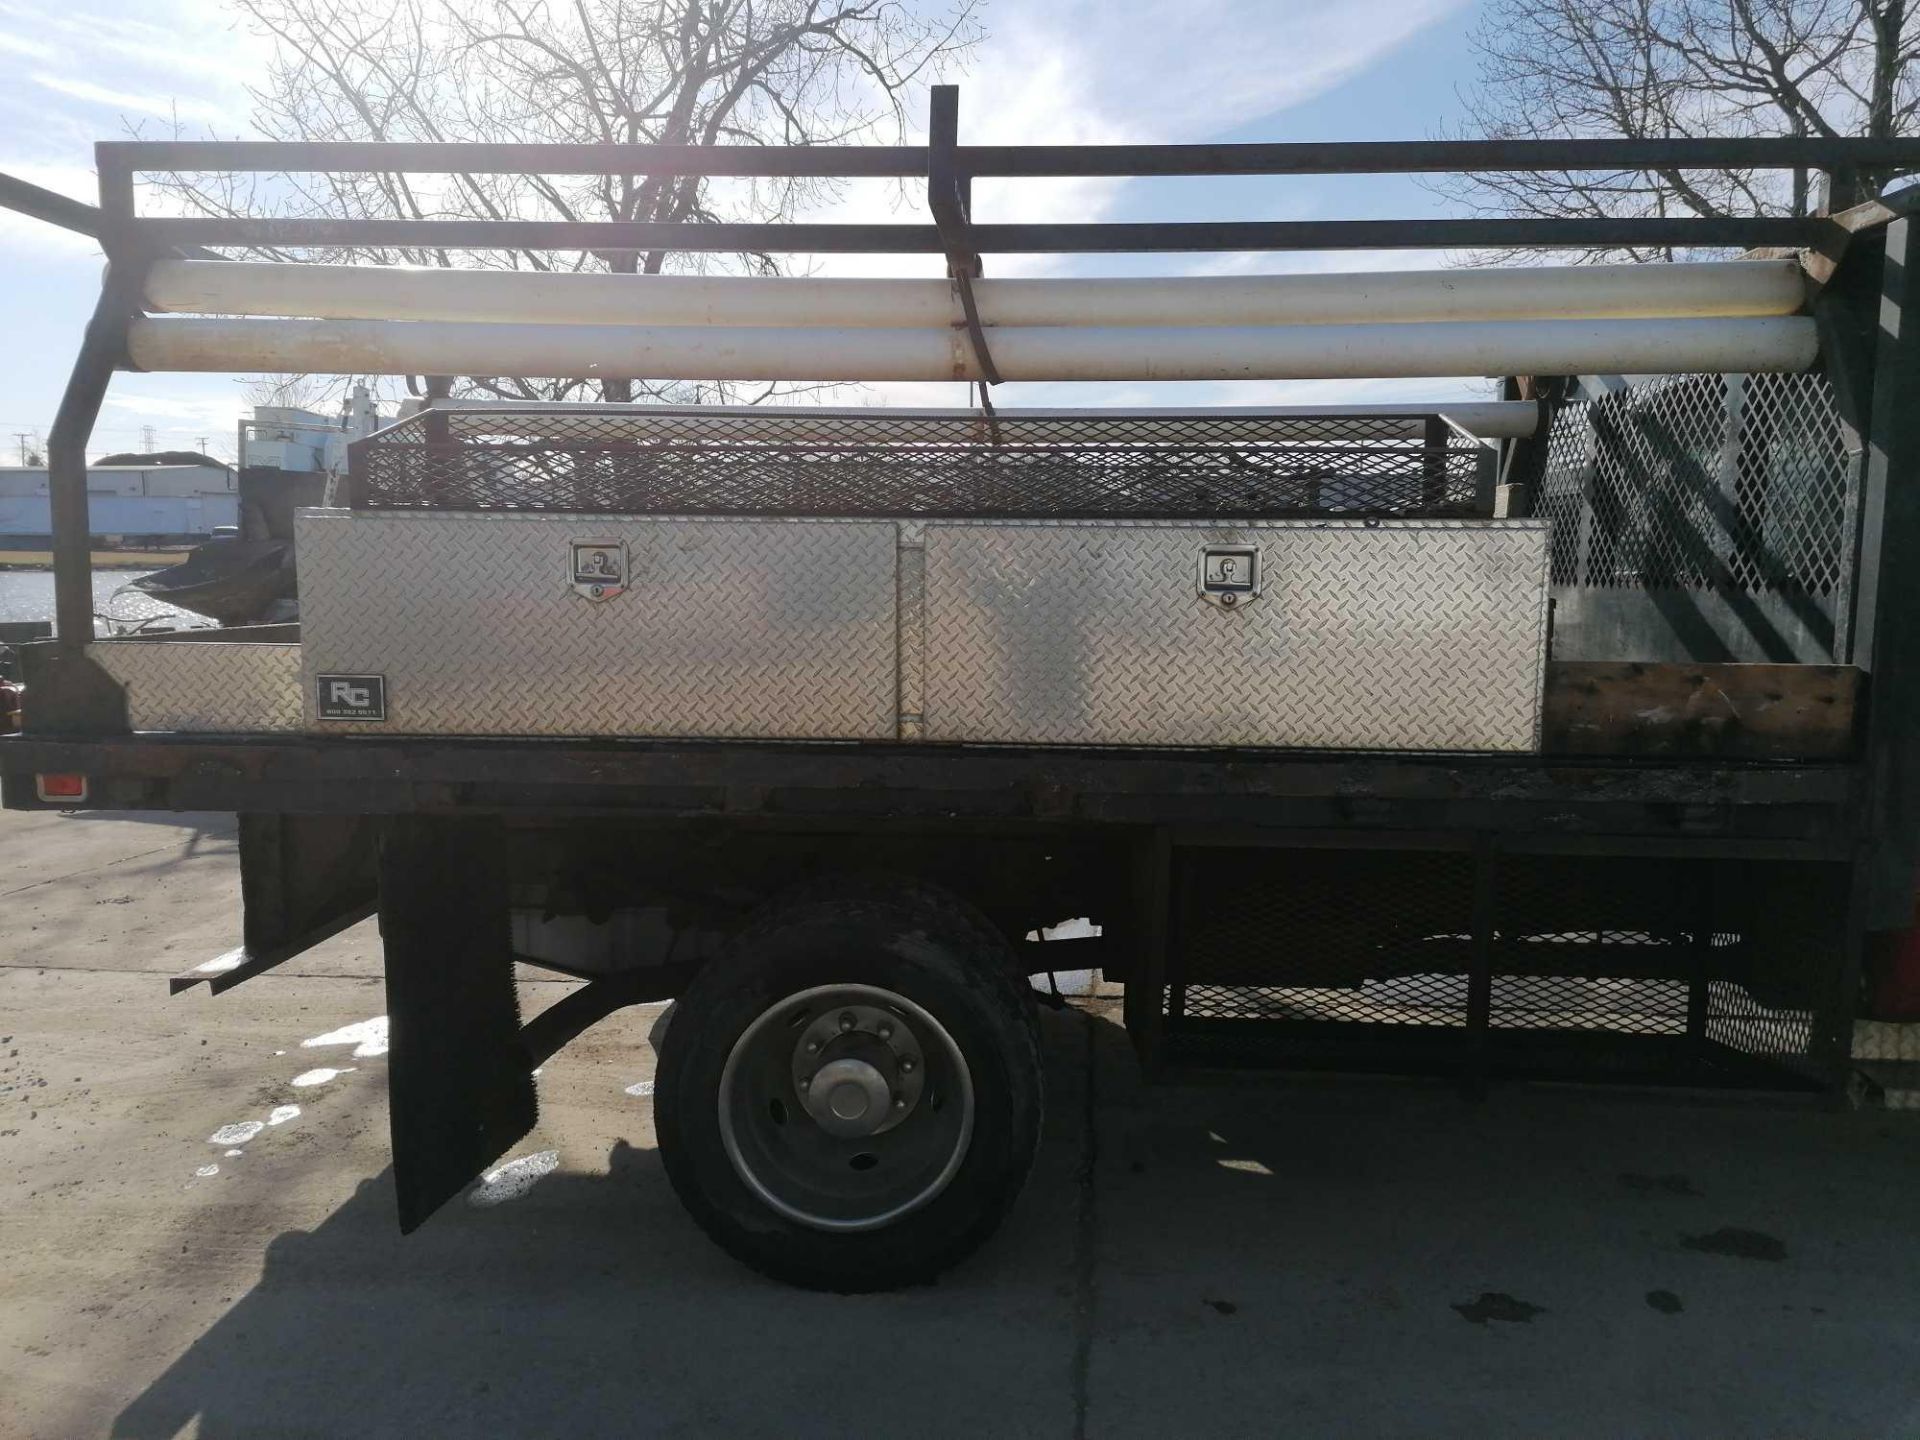 2003 Ford F-450 XL Super Duty Flatbed Truck, VIN # 1FDXF46P34EB87876, 191869 Miles, Dually Truck - Image 11 of 26